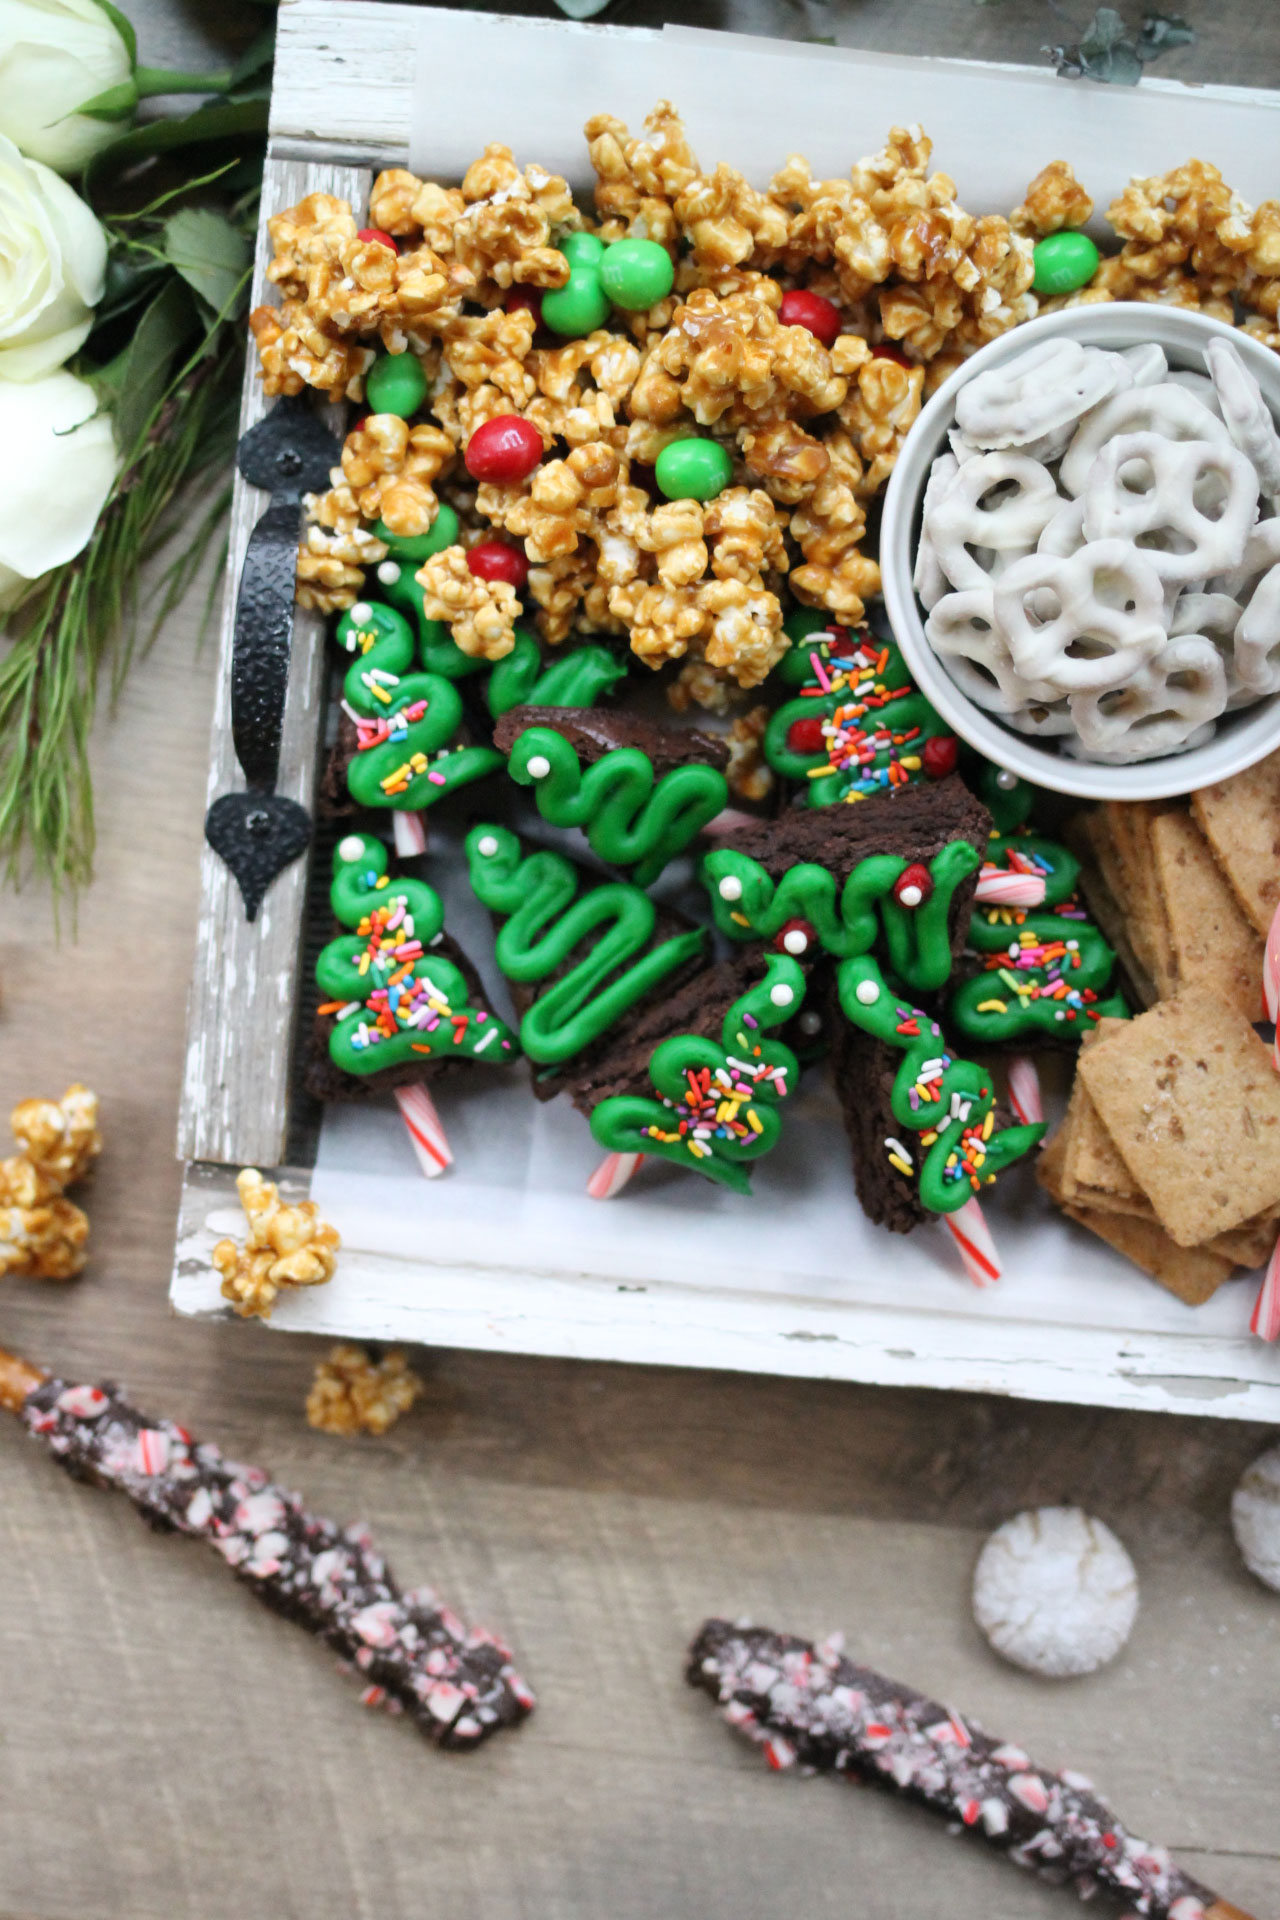 How to make the ultimate dessert snack board for the holidays; a.k.a., a sweet charcuterie spread. | glitterinc.com | @glitterinc - How to Make a Holiday Dessert Charcuterie Board by North Carolina foodie blogger Glitter, Inc.